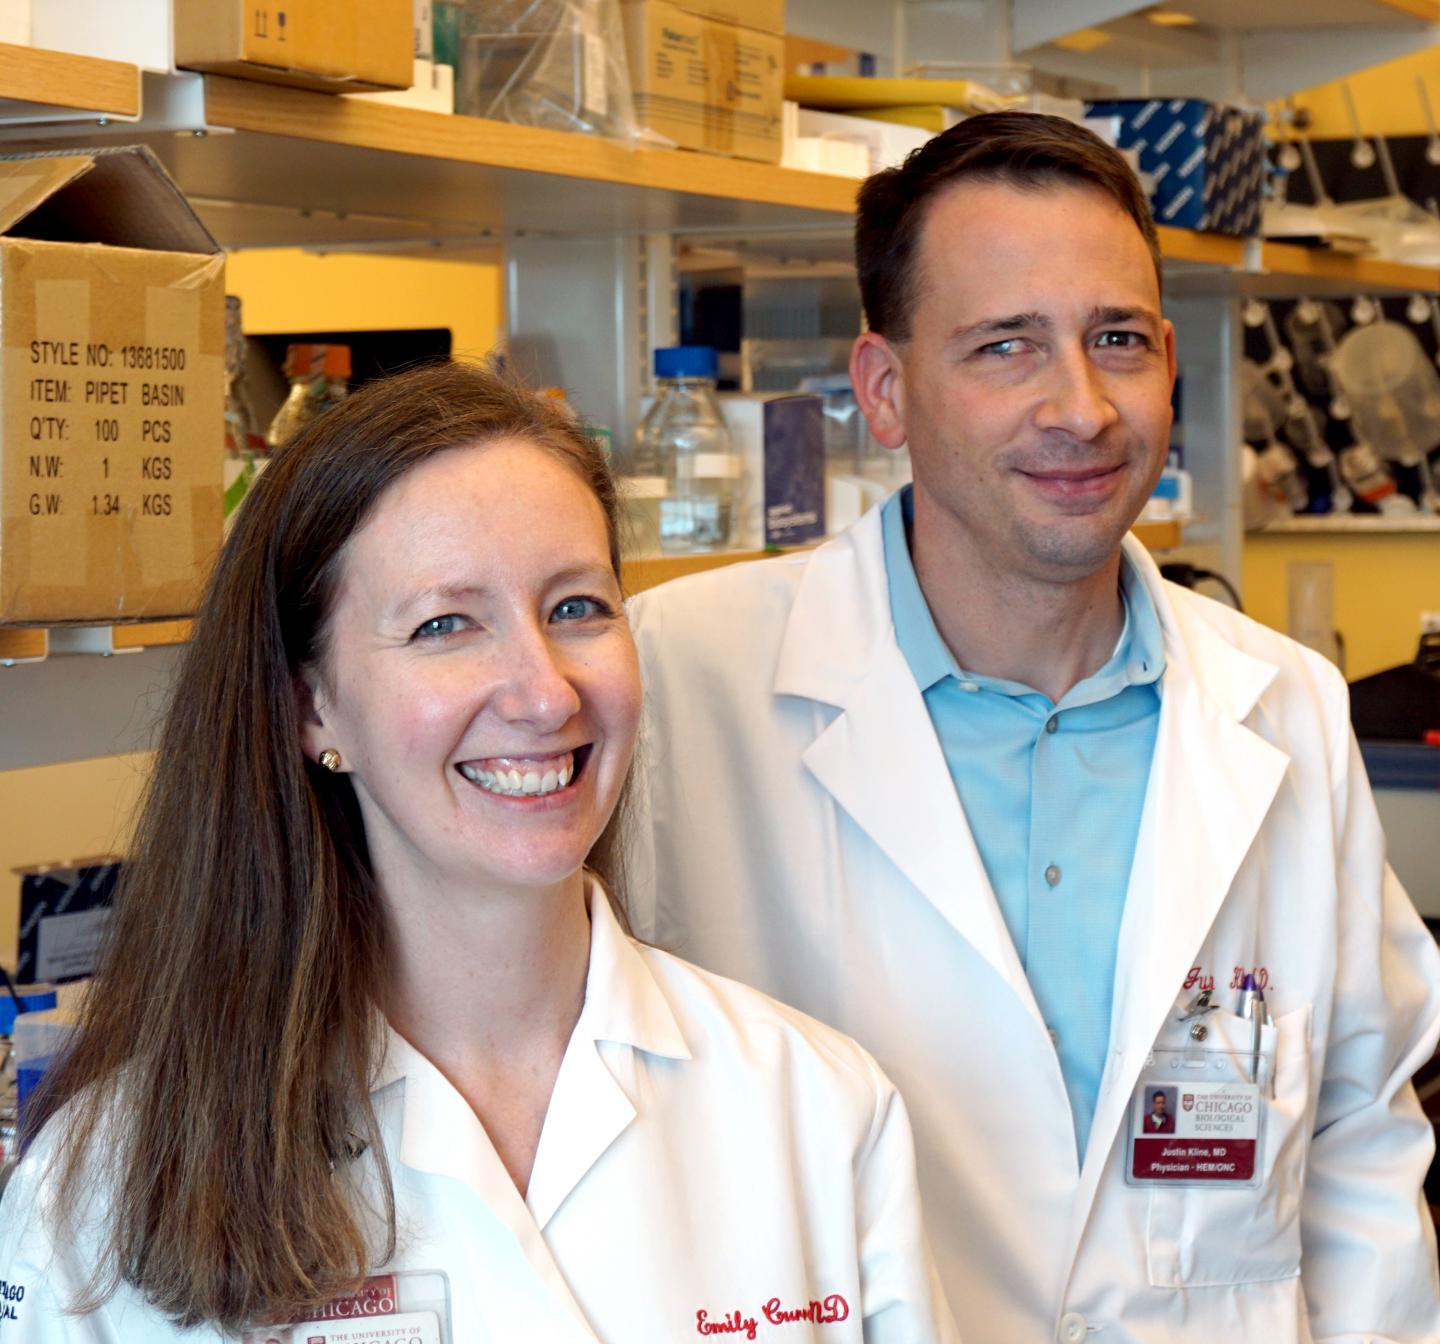 Drs. Emily Curran and Justin Kline, University of Chicago Medical Center